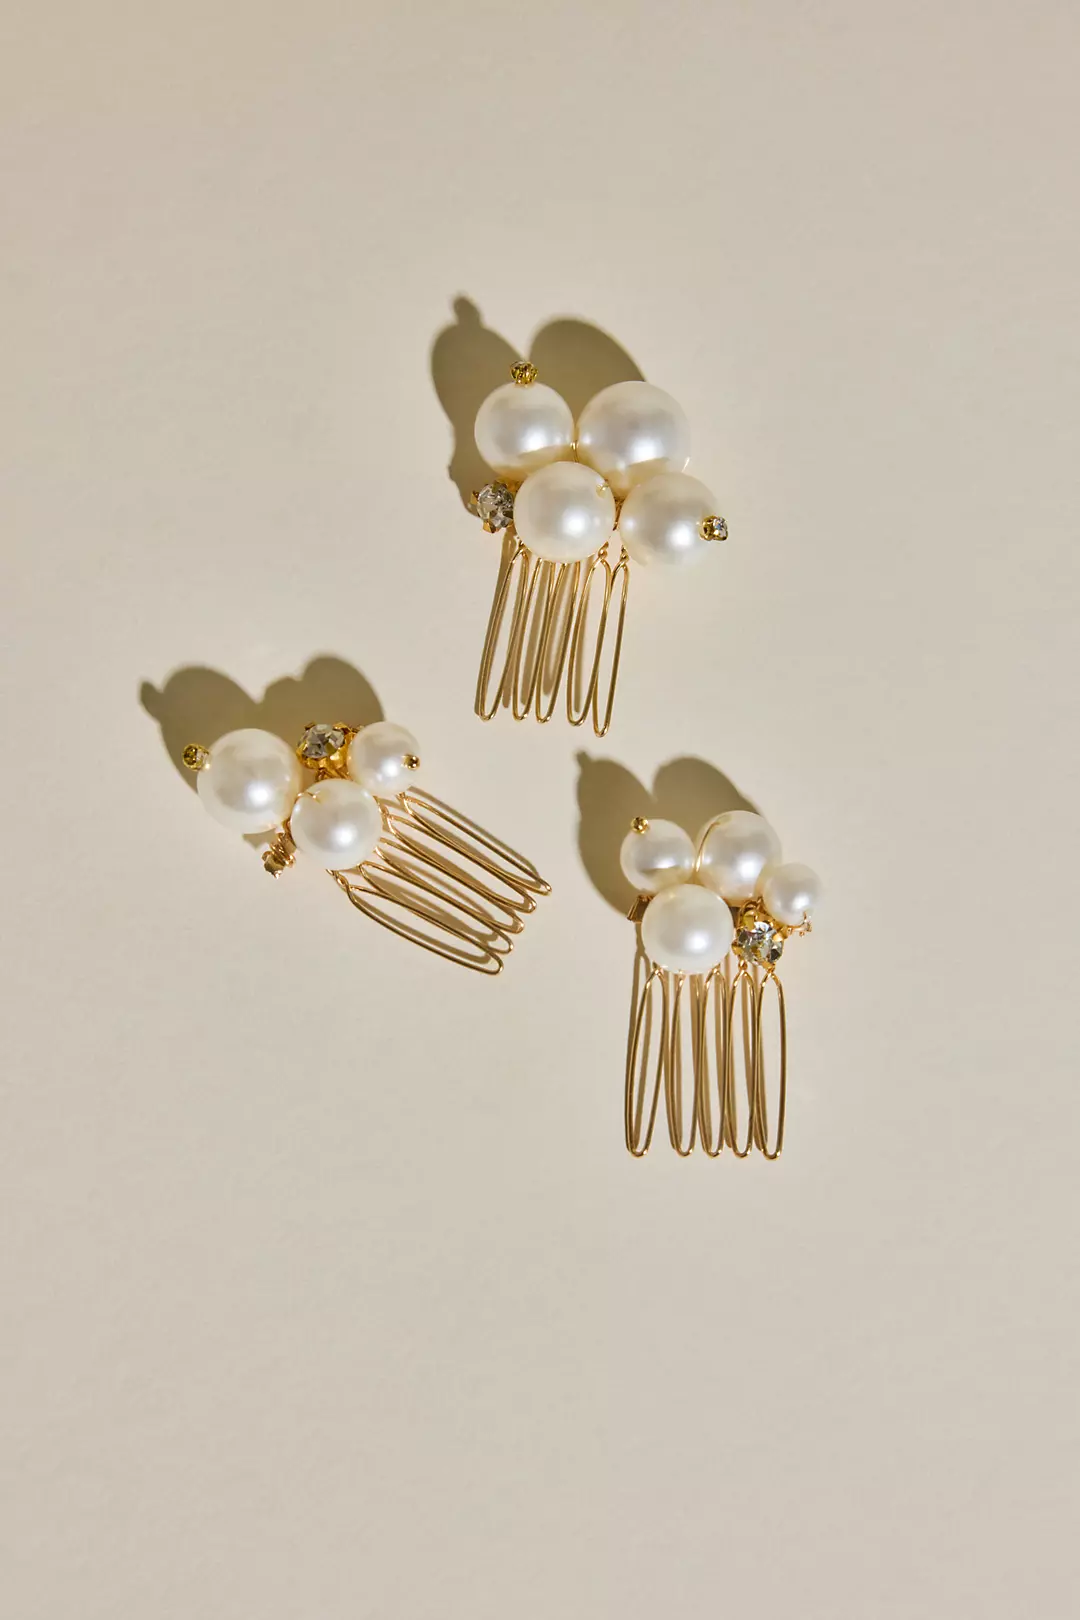 Pearl Cluster Hair Comb Set Image